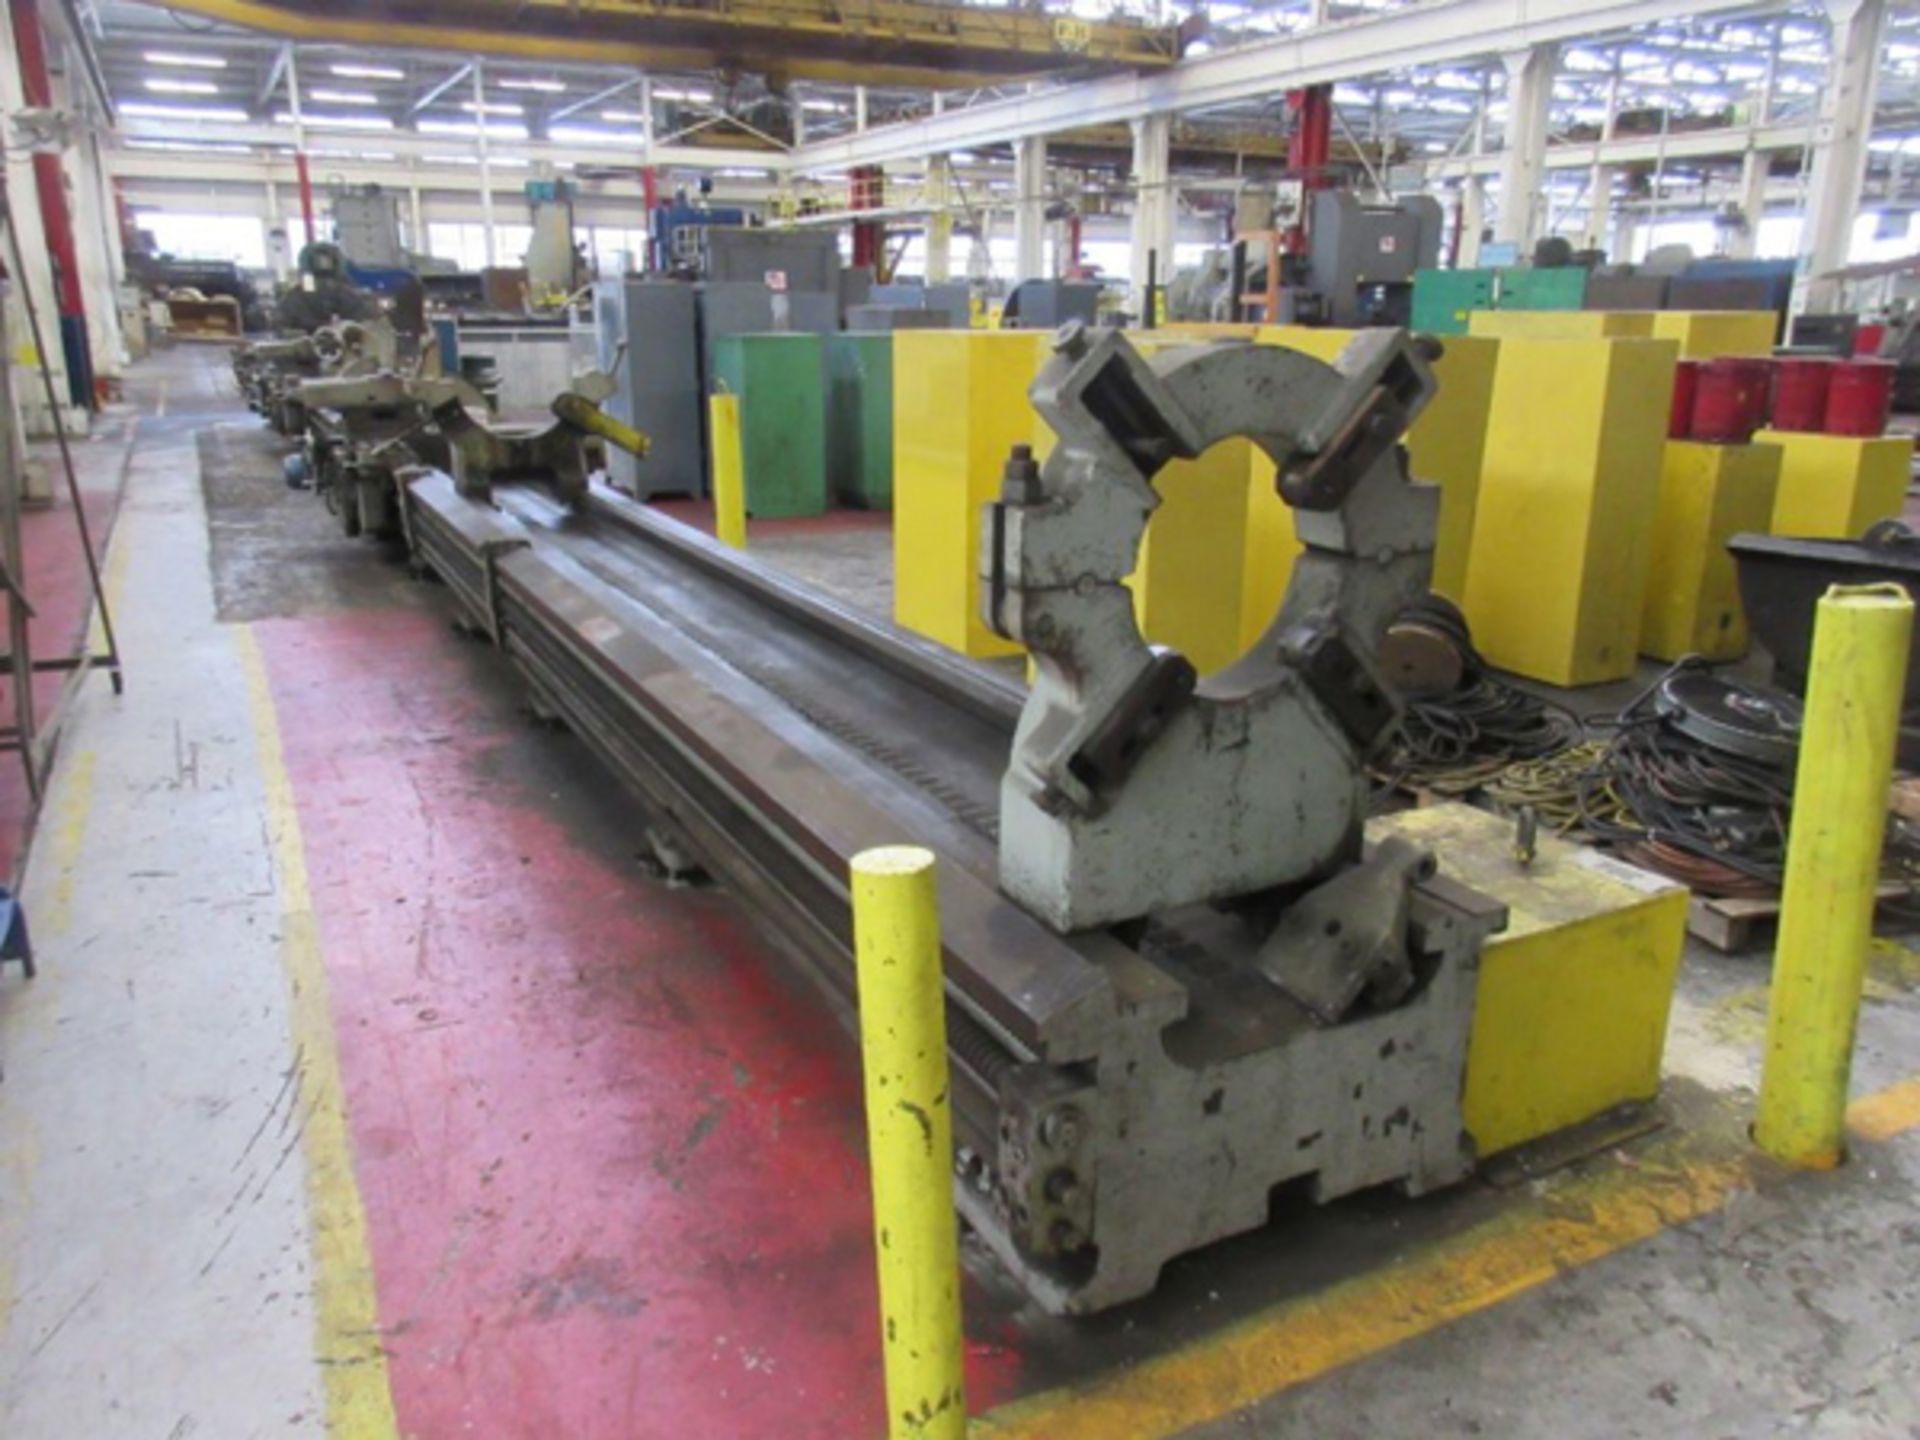 52" Swing x 58' Center Engine Lathe Leblond Dual Carriage Heavy Duty 100 HP - Located In: Pomona, CA - Image 7 of 8